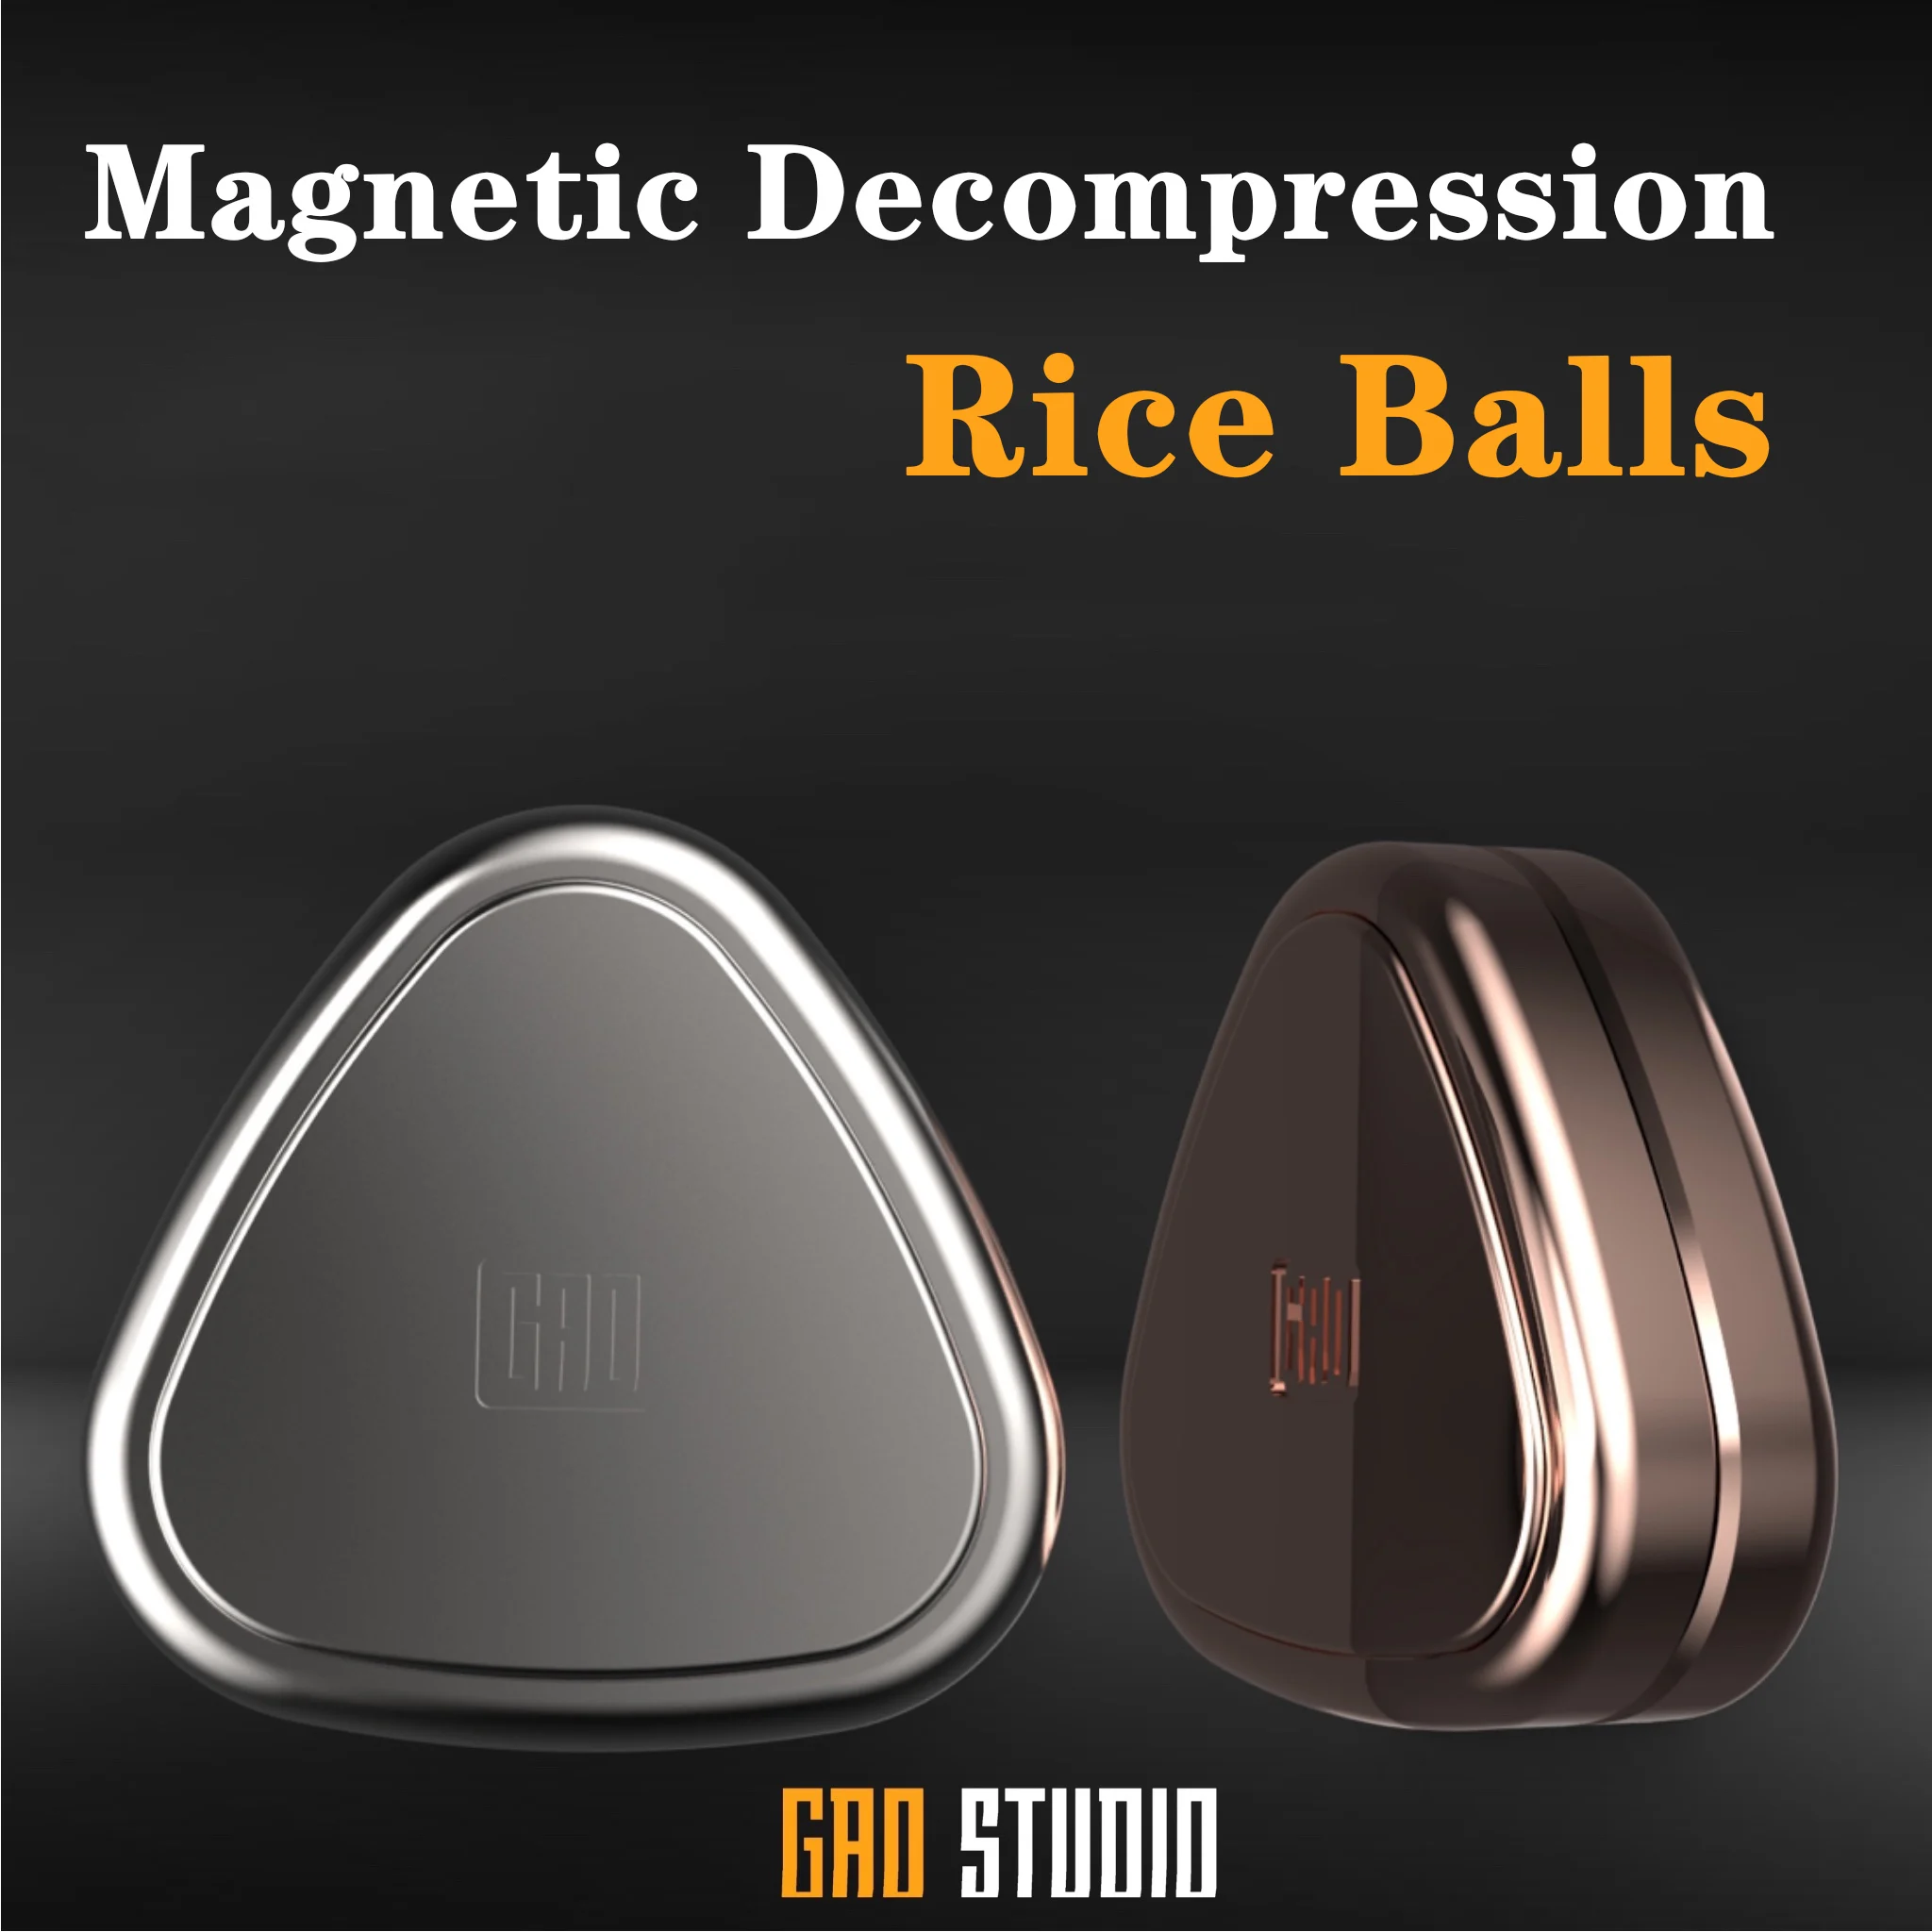 STOCK GAO STUDIO Magnetic Rice Ball Maga Multi-functional Decompression Push Brand Edc Stainless Steel Leisure Trend Office Toys